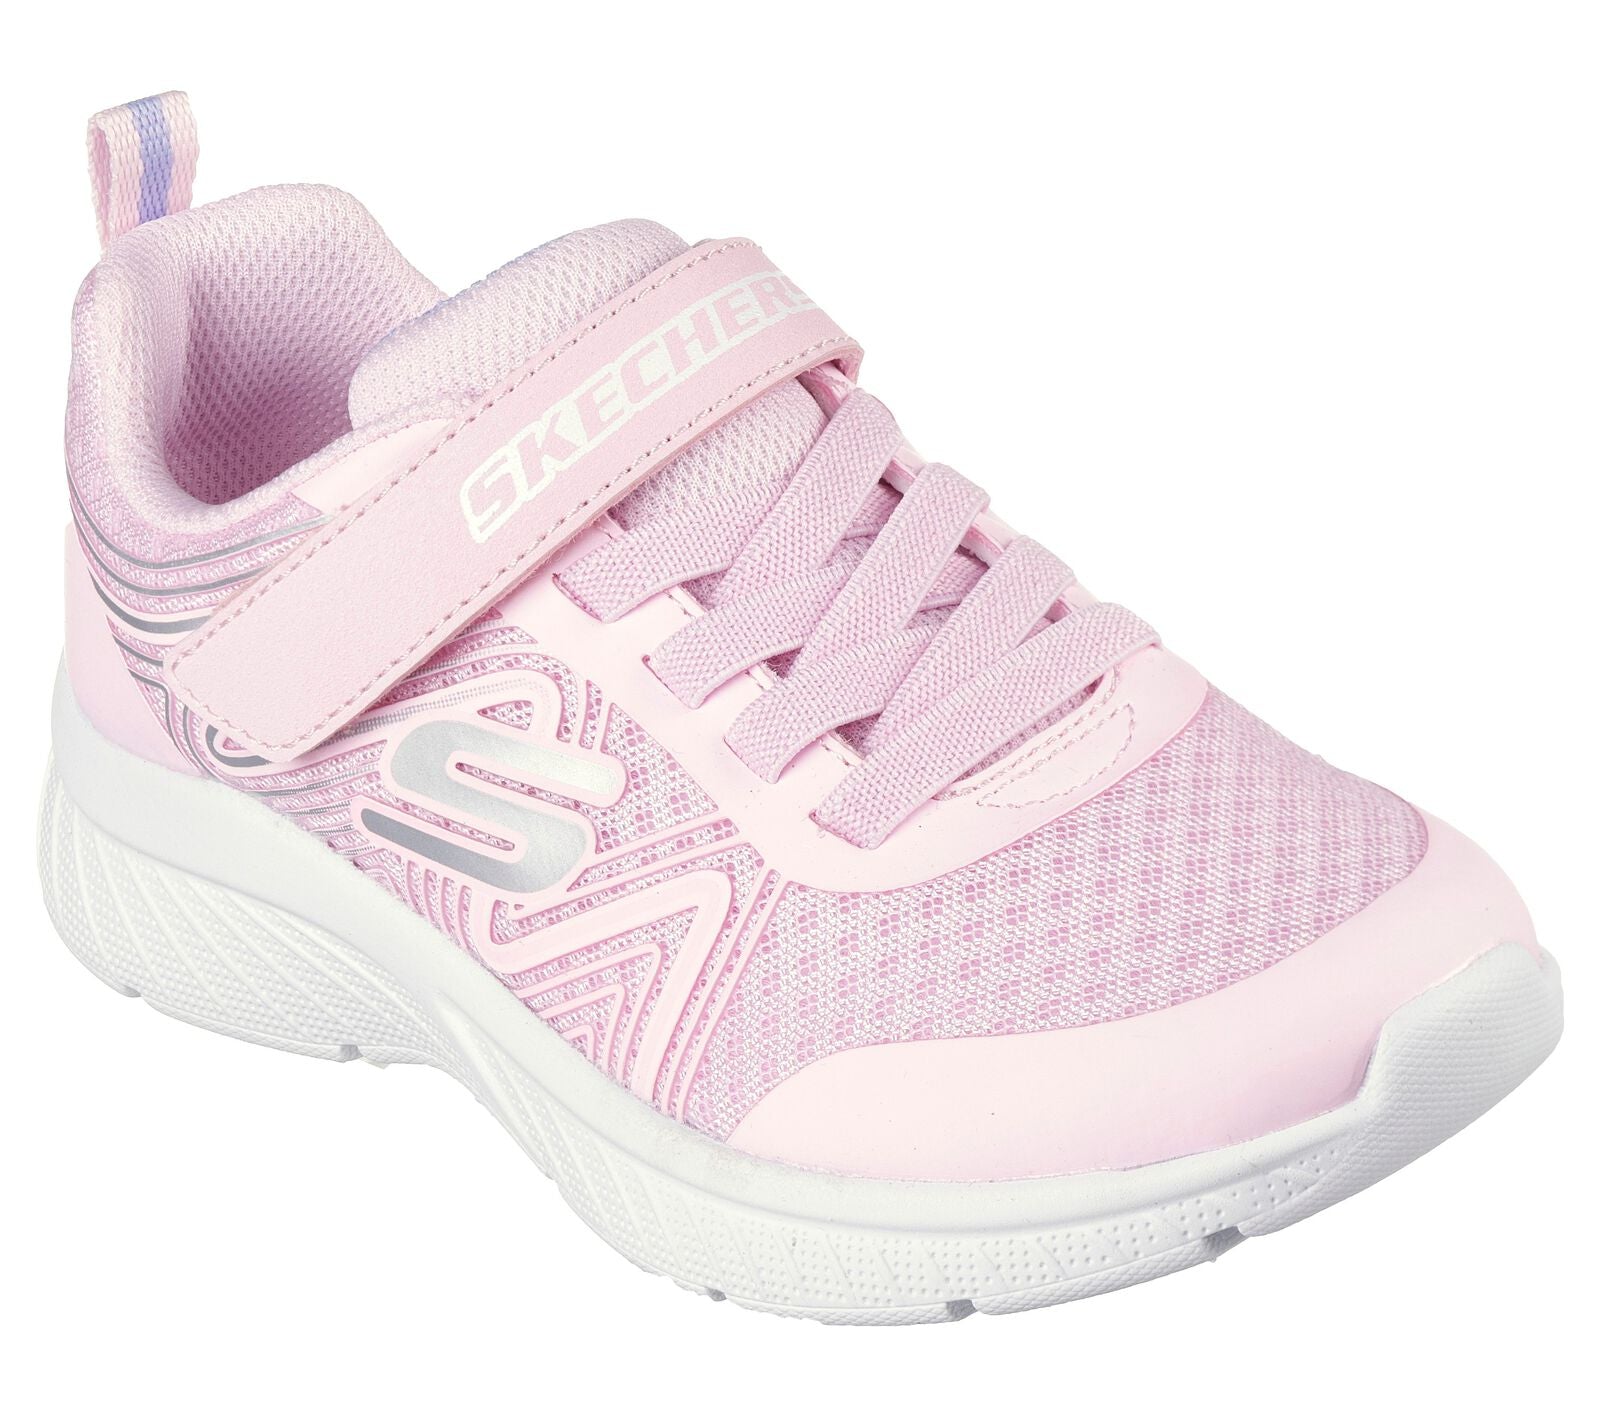 Skechers Swirl Sweet in pink, featuring the Skechers logo. Velcro fastening with flat elastic bungee laces. Right angled view.